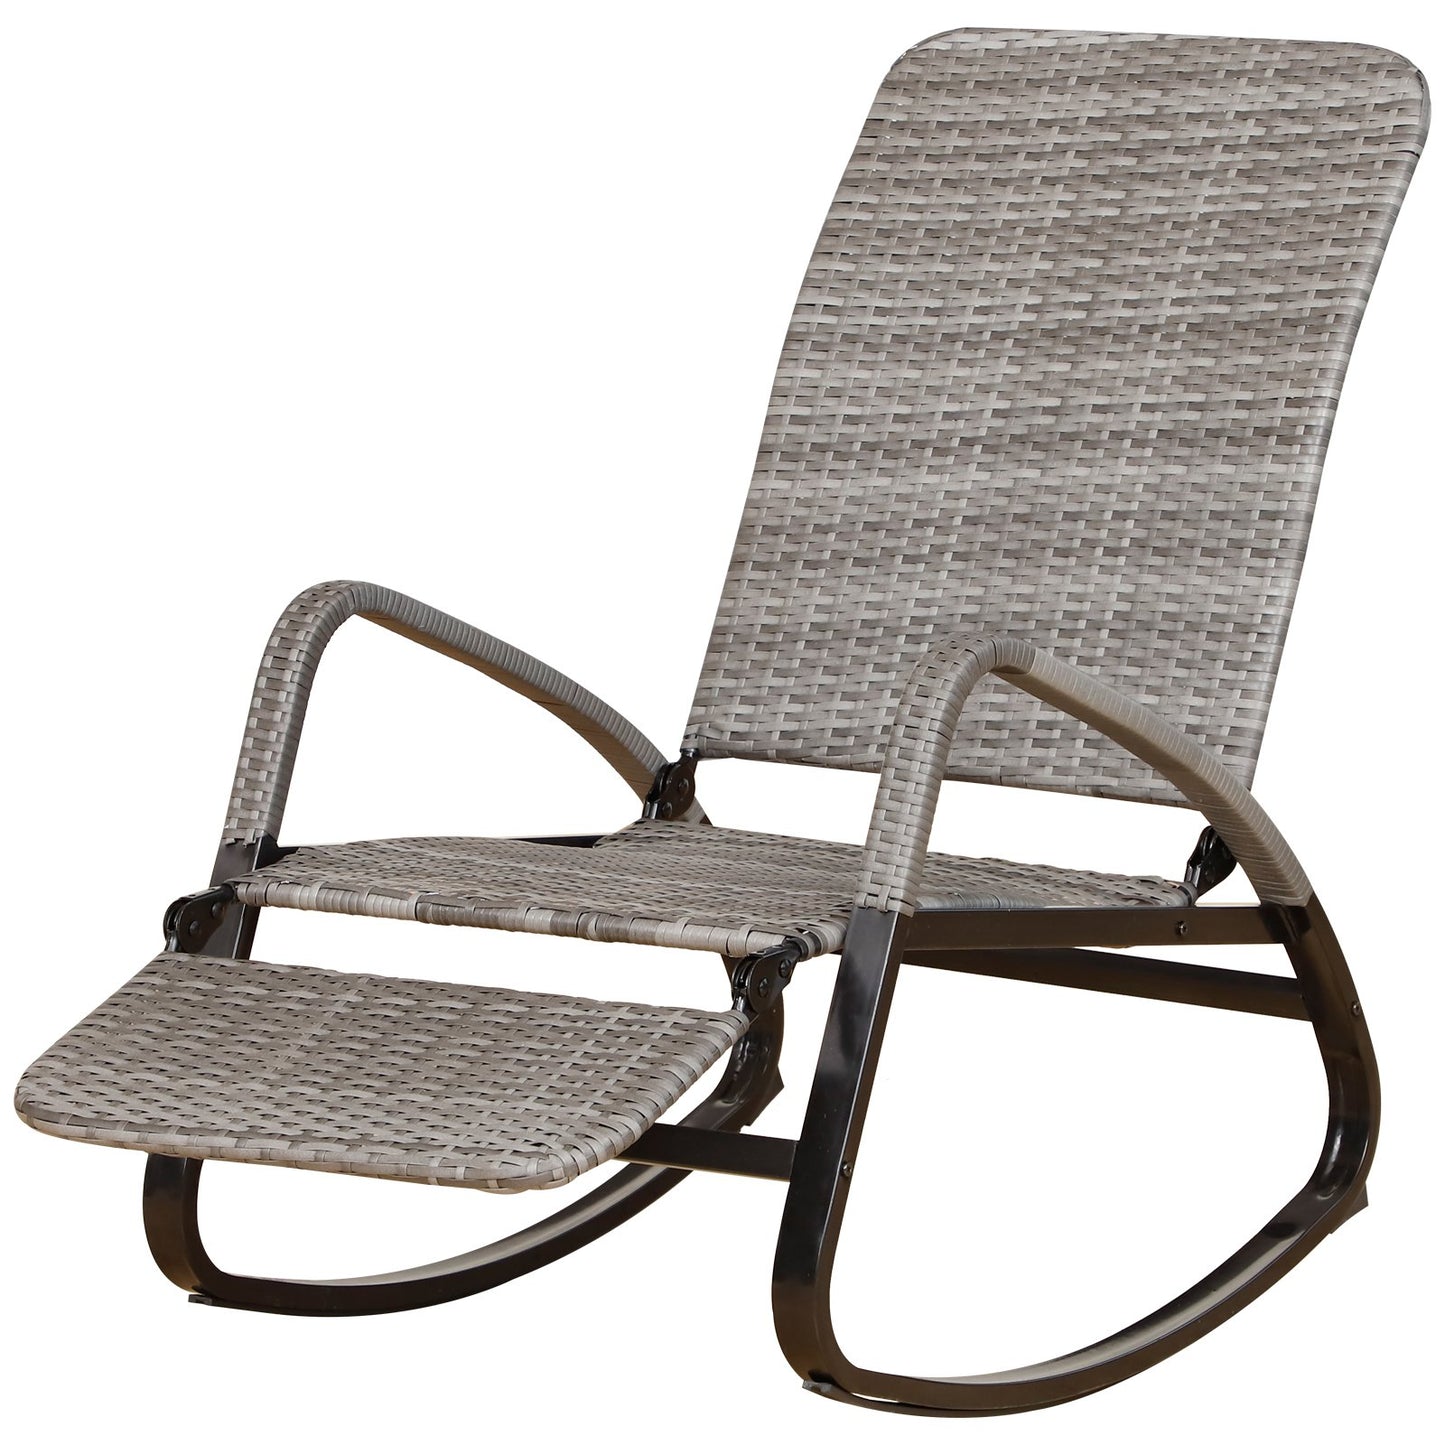 Outsunny PE Rattan Foldable Recliner Rocking Chair w/ Footrest Grey